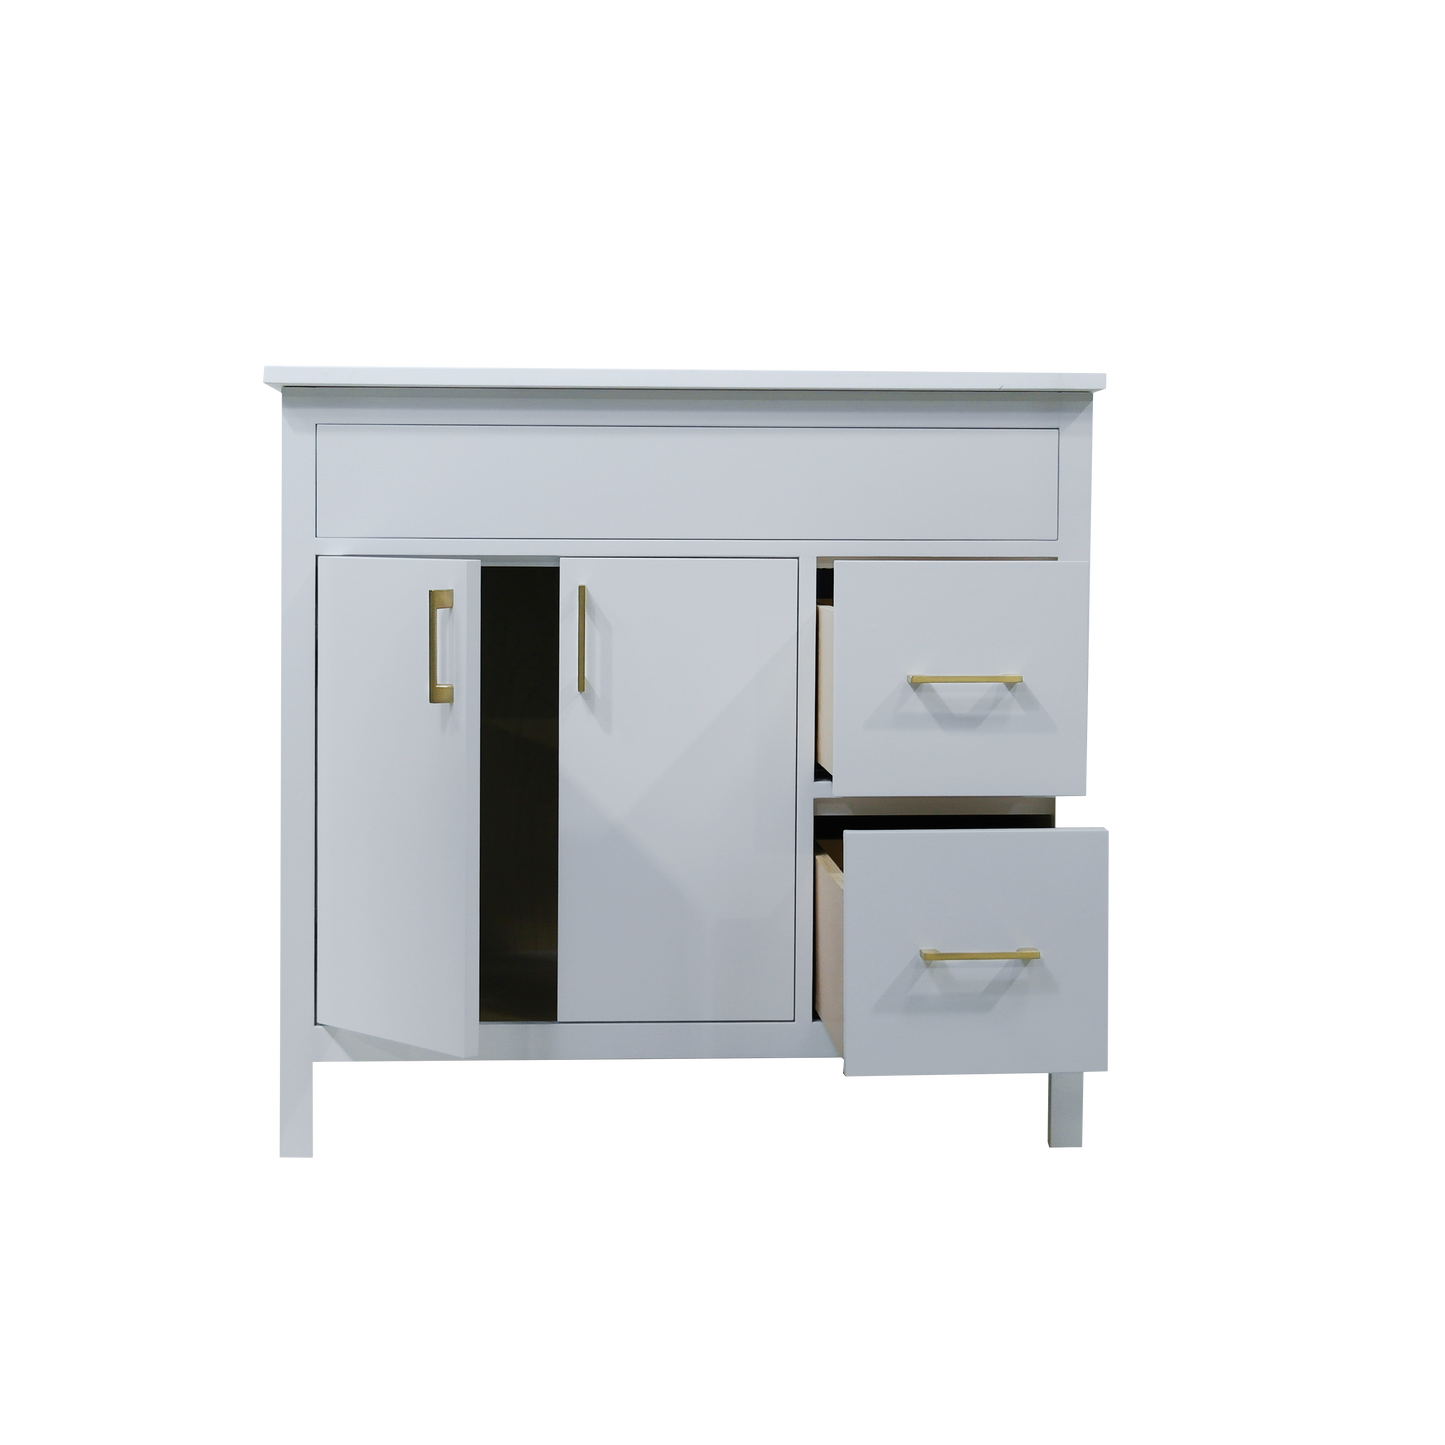 36" Mirea style white wooden vanity with 2 drawers on the right with Quartz